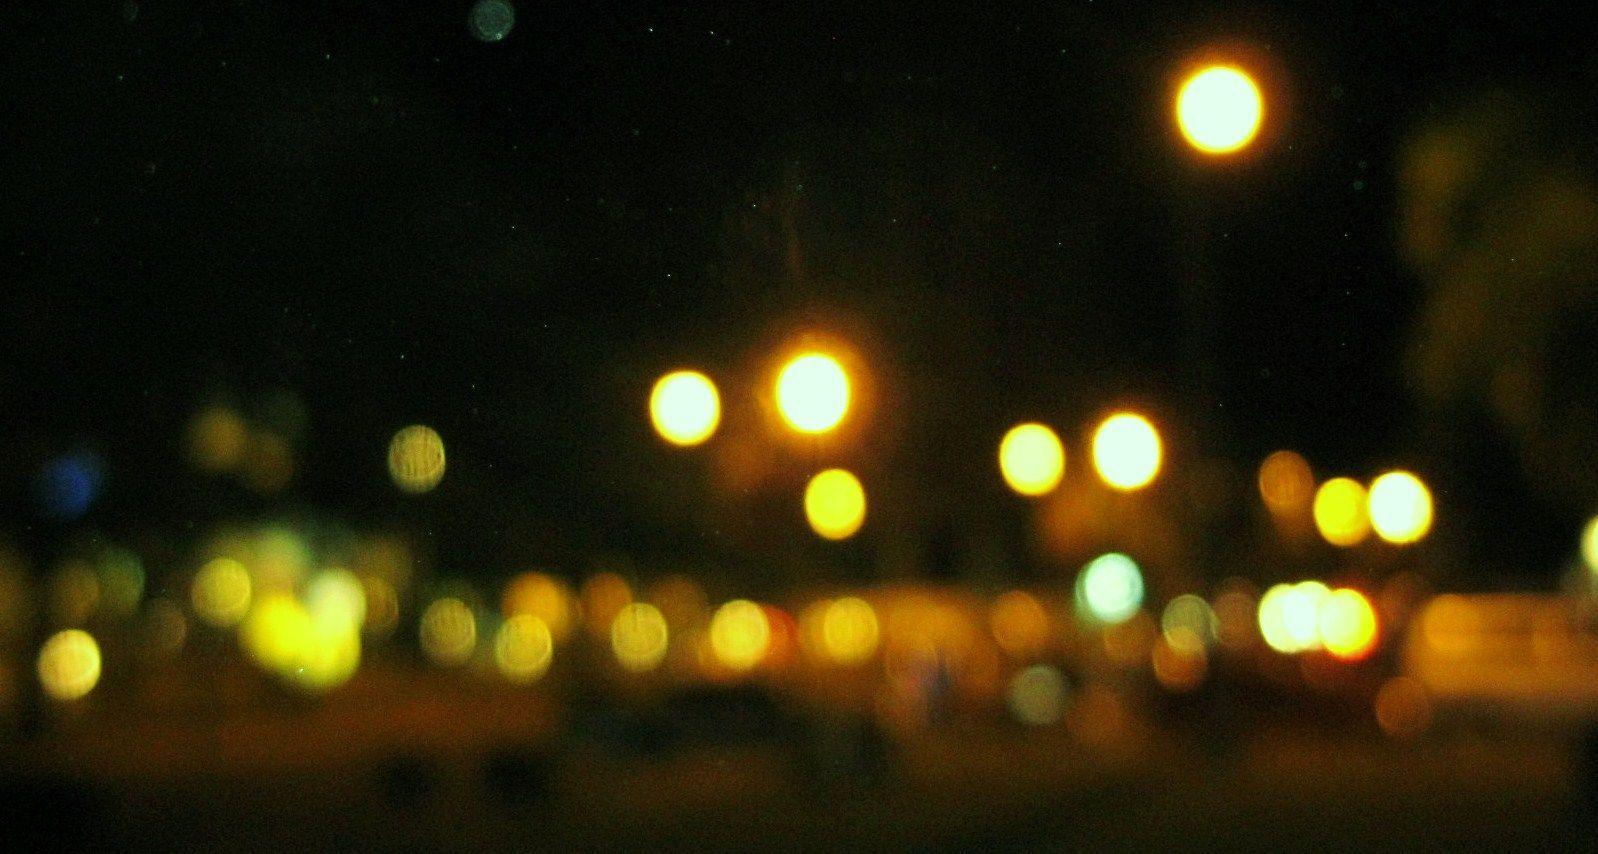 Wallpaper For > Blurred City Lights Background Tumblr